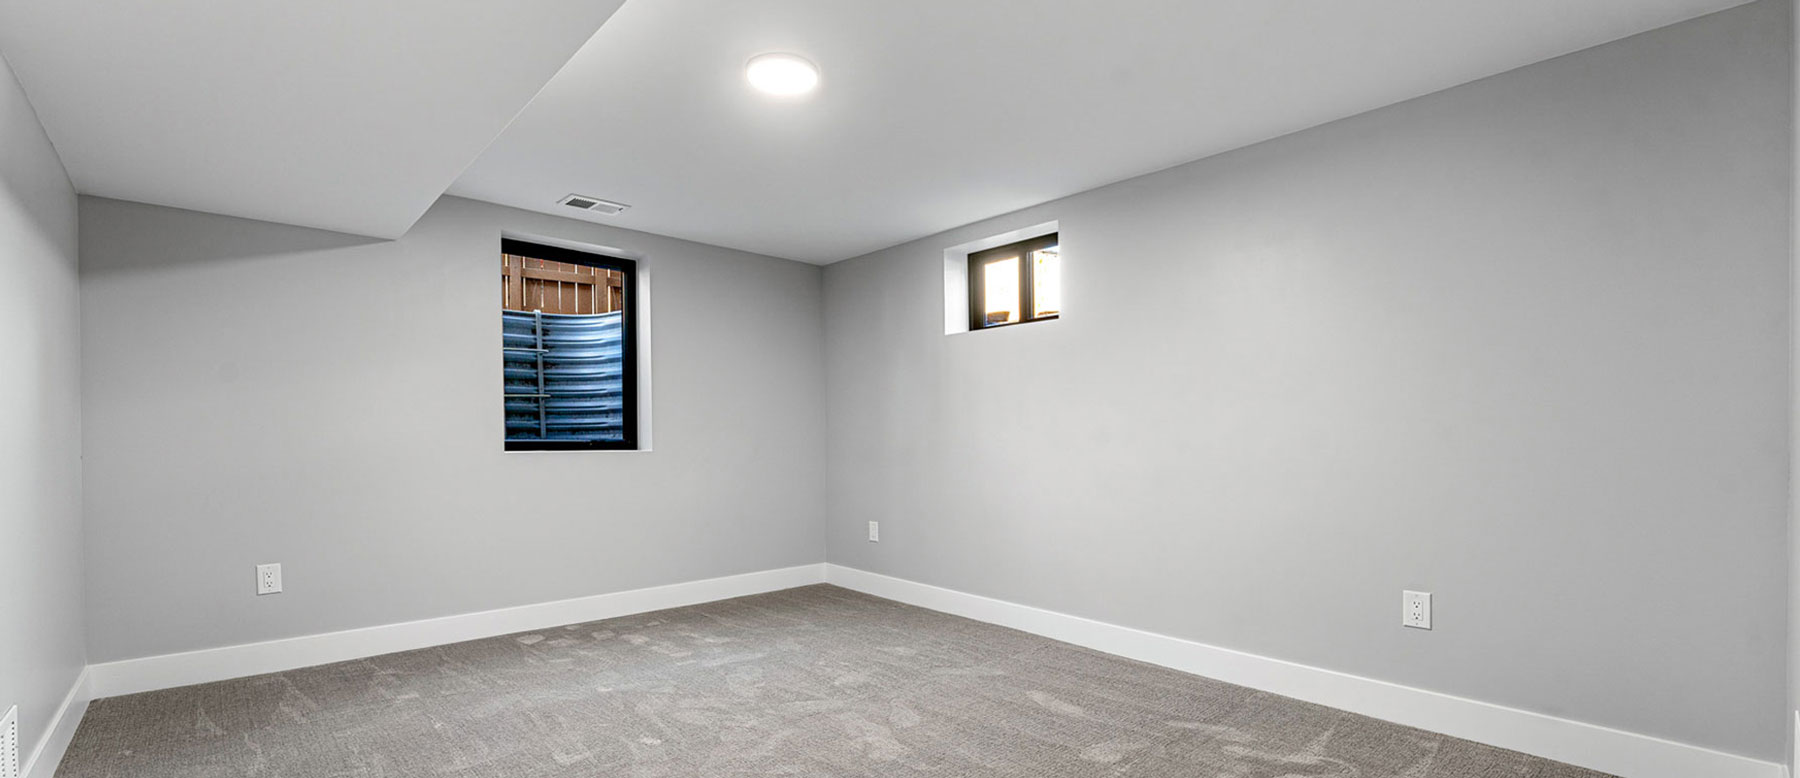 after-basement-finishing-services